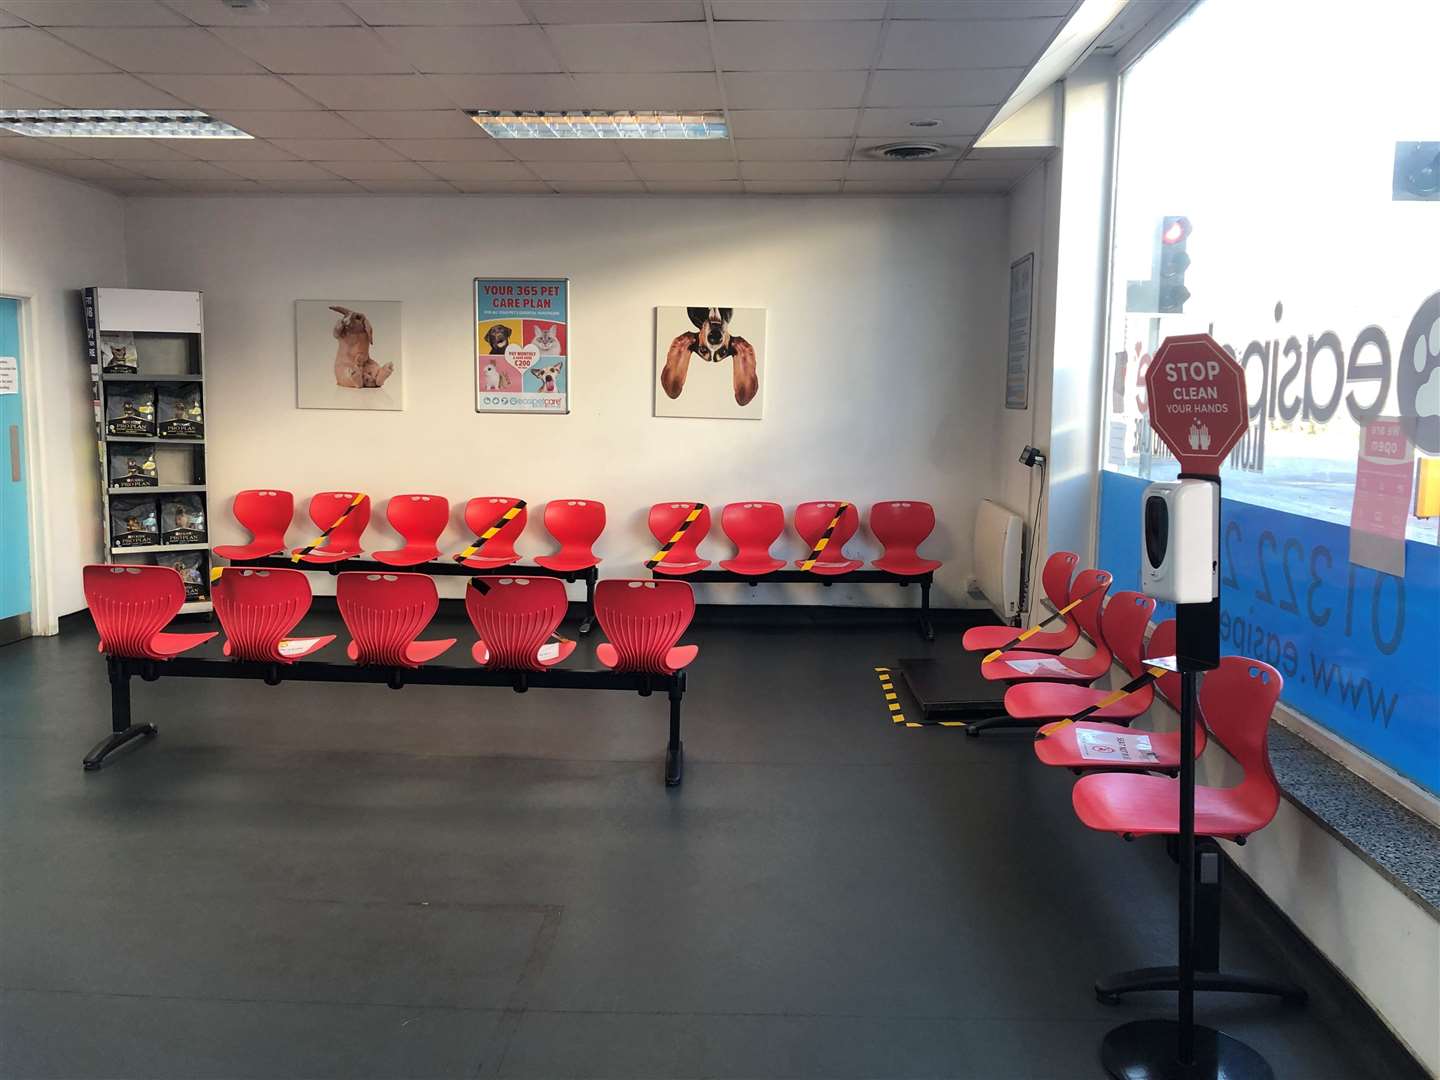 Some chairs have been taped off in the waiting area to help maintain social distancing guidelines. Picture: Hetty Mulhall